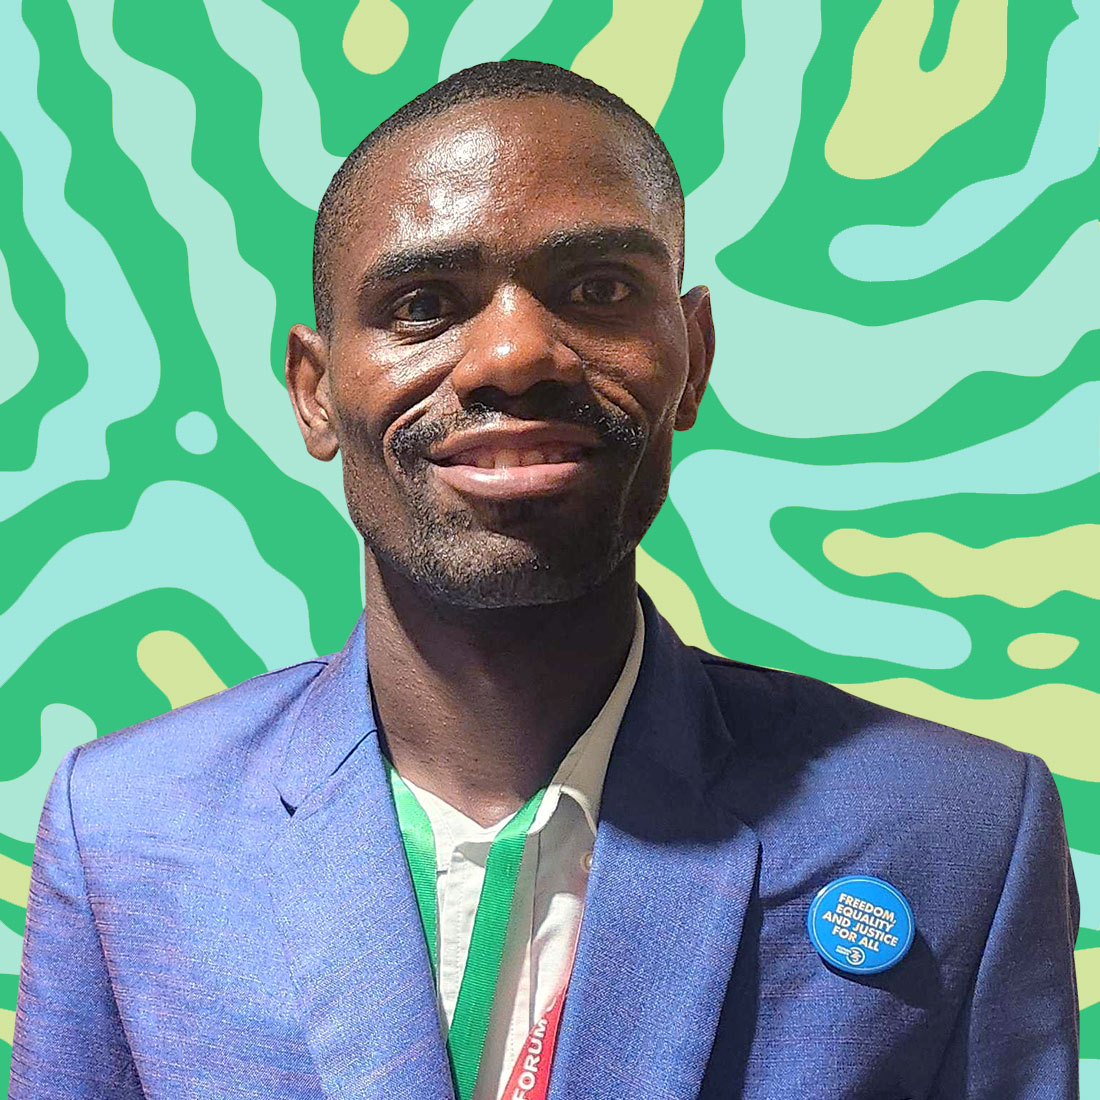 A headshot of a young person in a blue suit on a green and yellow striped background